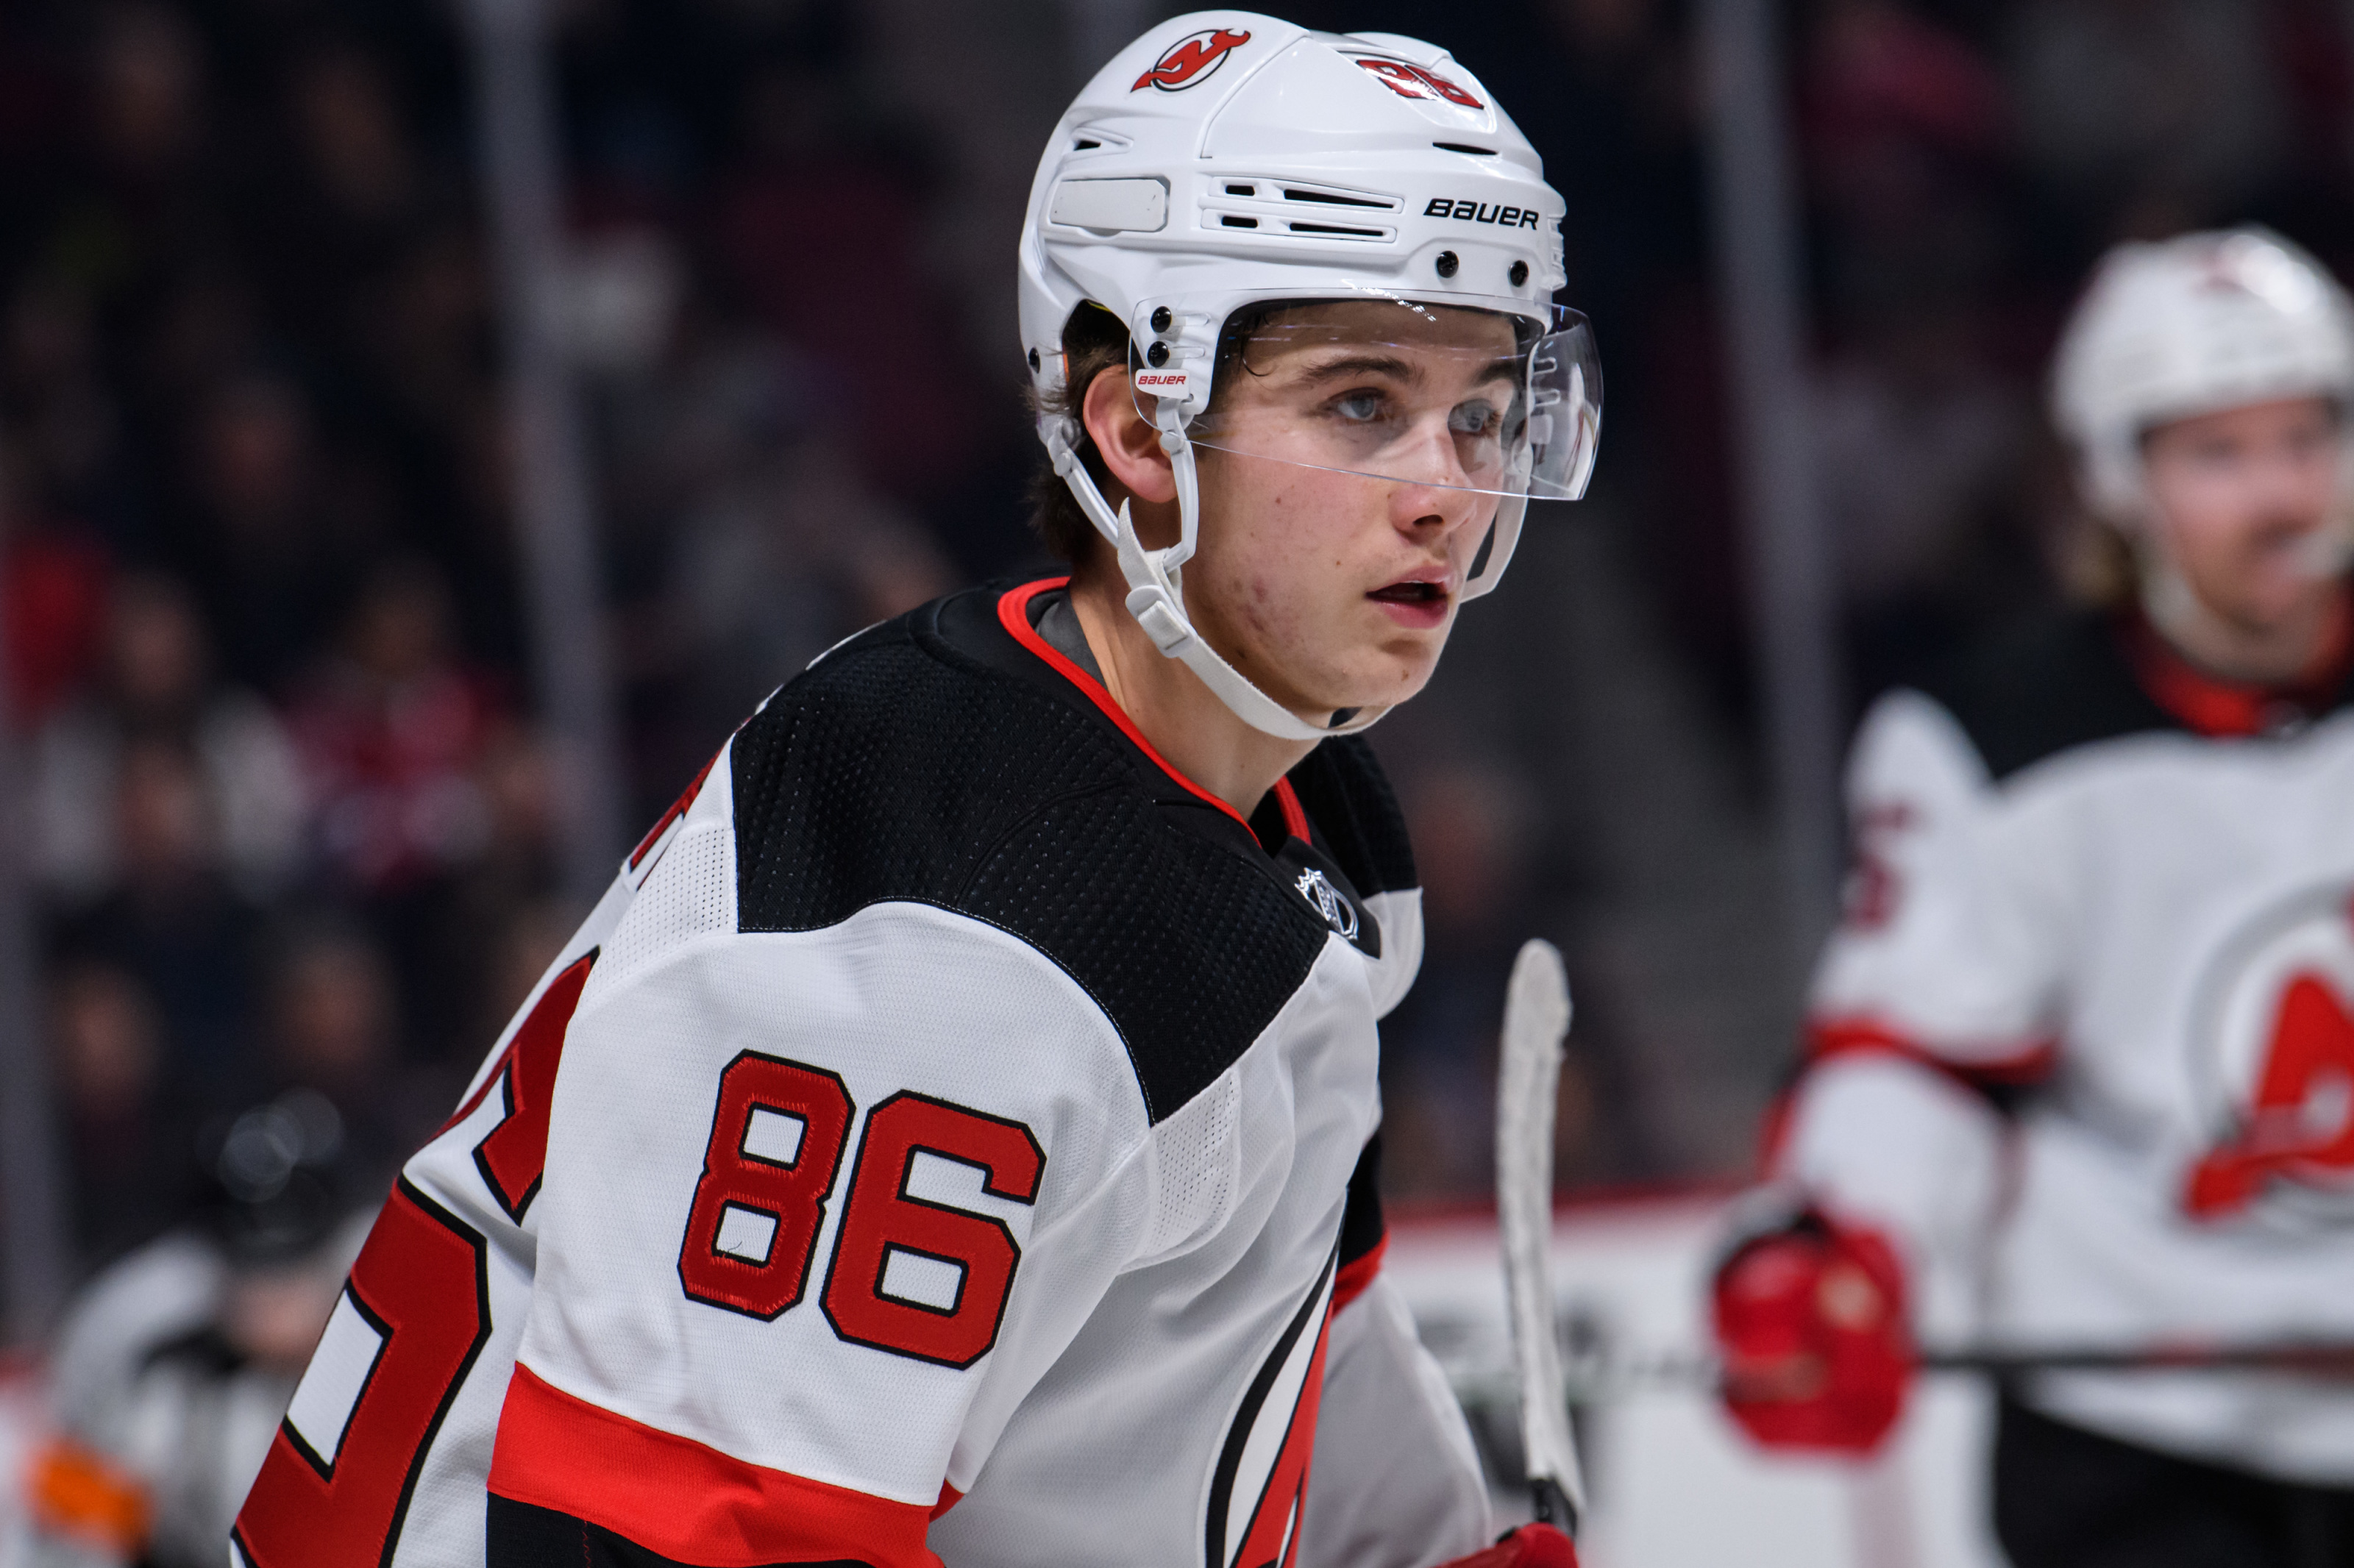 The Jack Hughes-led Devils have taken the next step and are a